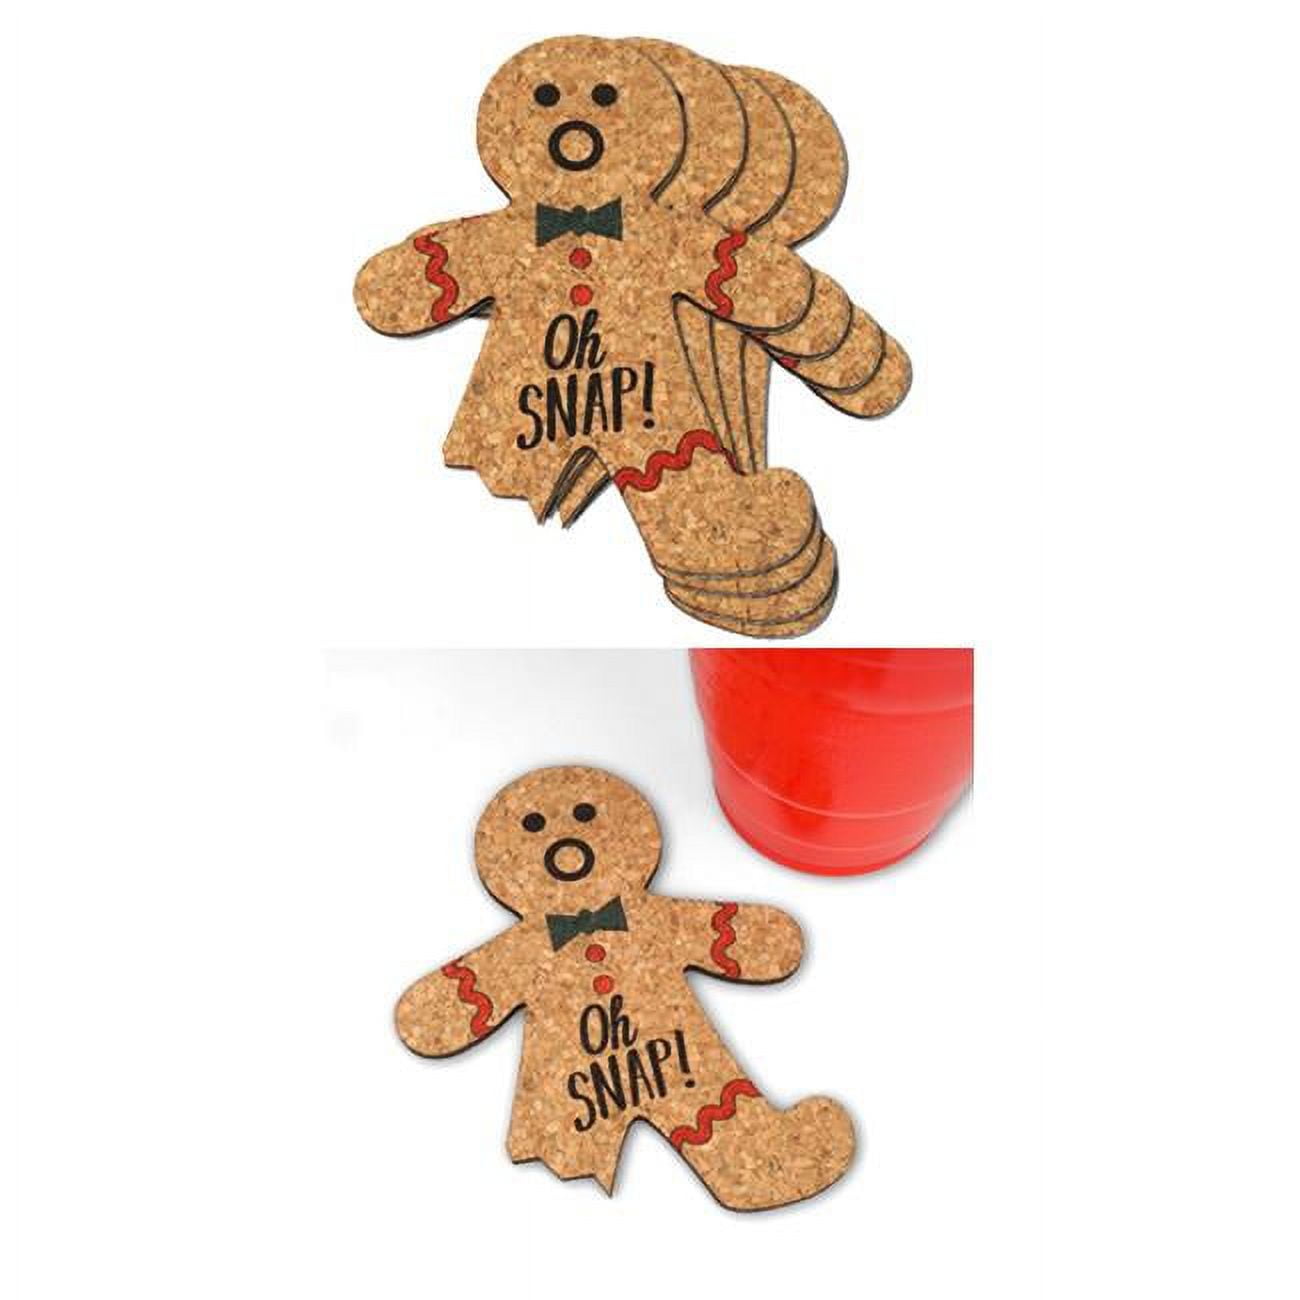 Picture of Ducky Days 8497254 3.75 x 5 in. Dia. Oh Snap Gingerbread Man Cork Coasters - Set of 4